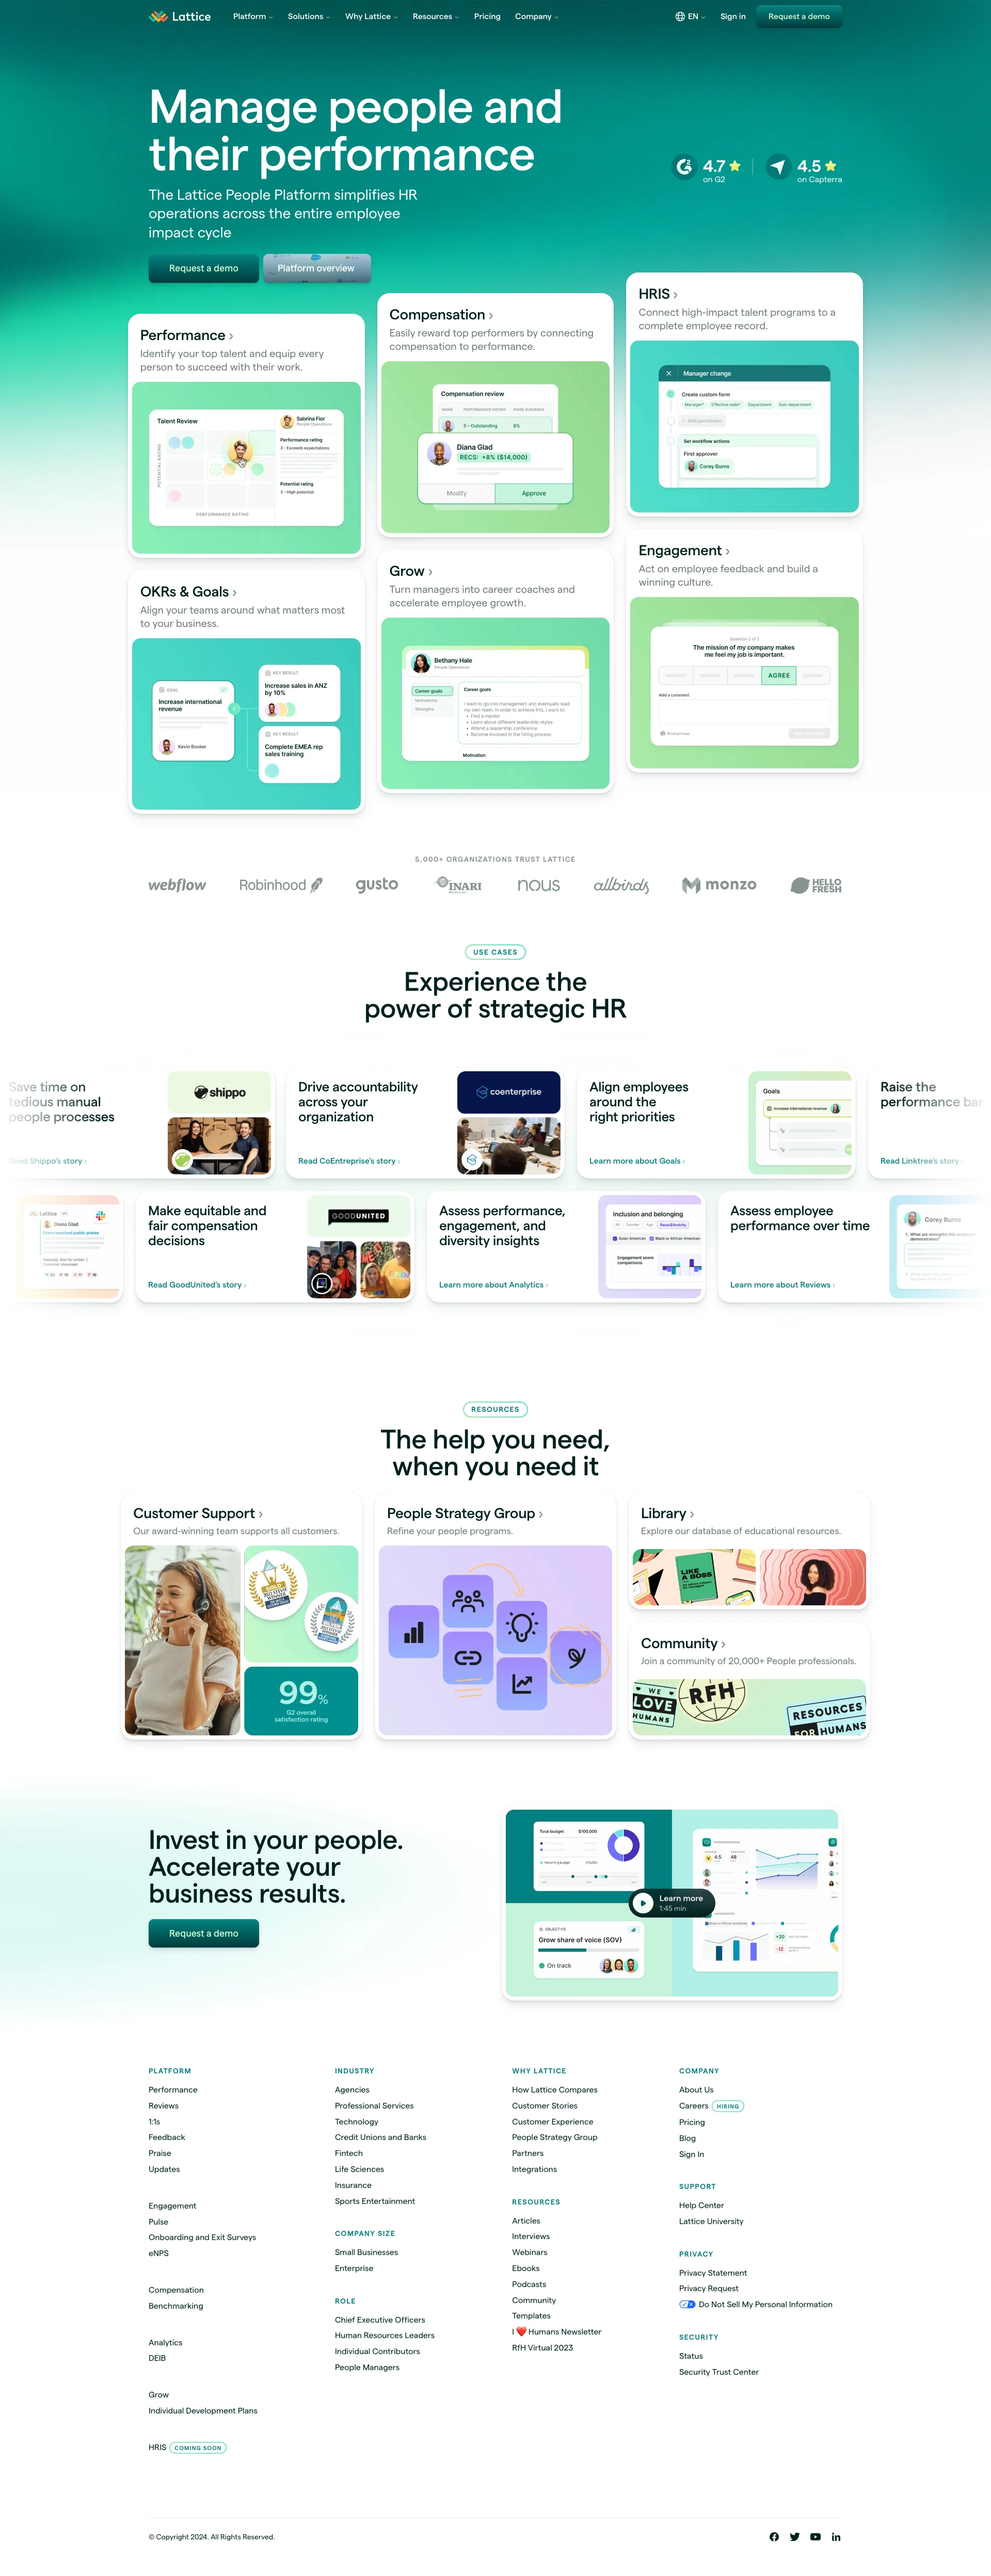 Lattice Landing Page Example: Lattice is the people management platform that empowers people leaders to build engaged, high-performing teams, inspire winning cultures, and make strategic, data-driven business decisions.